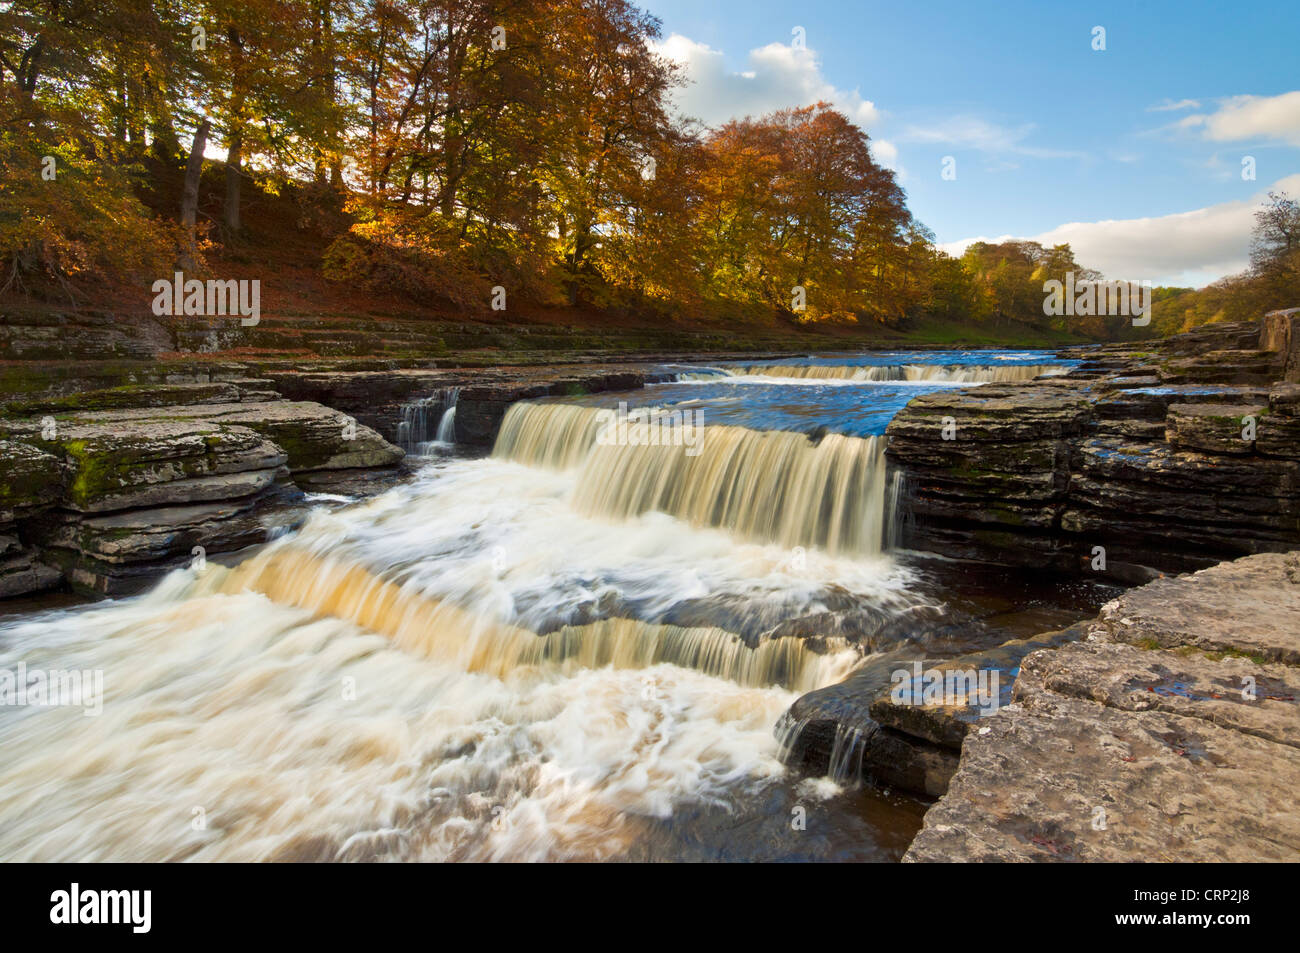 Yorkshire Dales National Park Lower Aysgarth Falls on the River ure mit Herbstfarben Wensleydale Yorkshire Dales North Yorkshire England UK GB Stockfoto